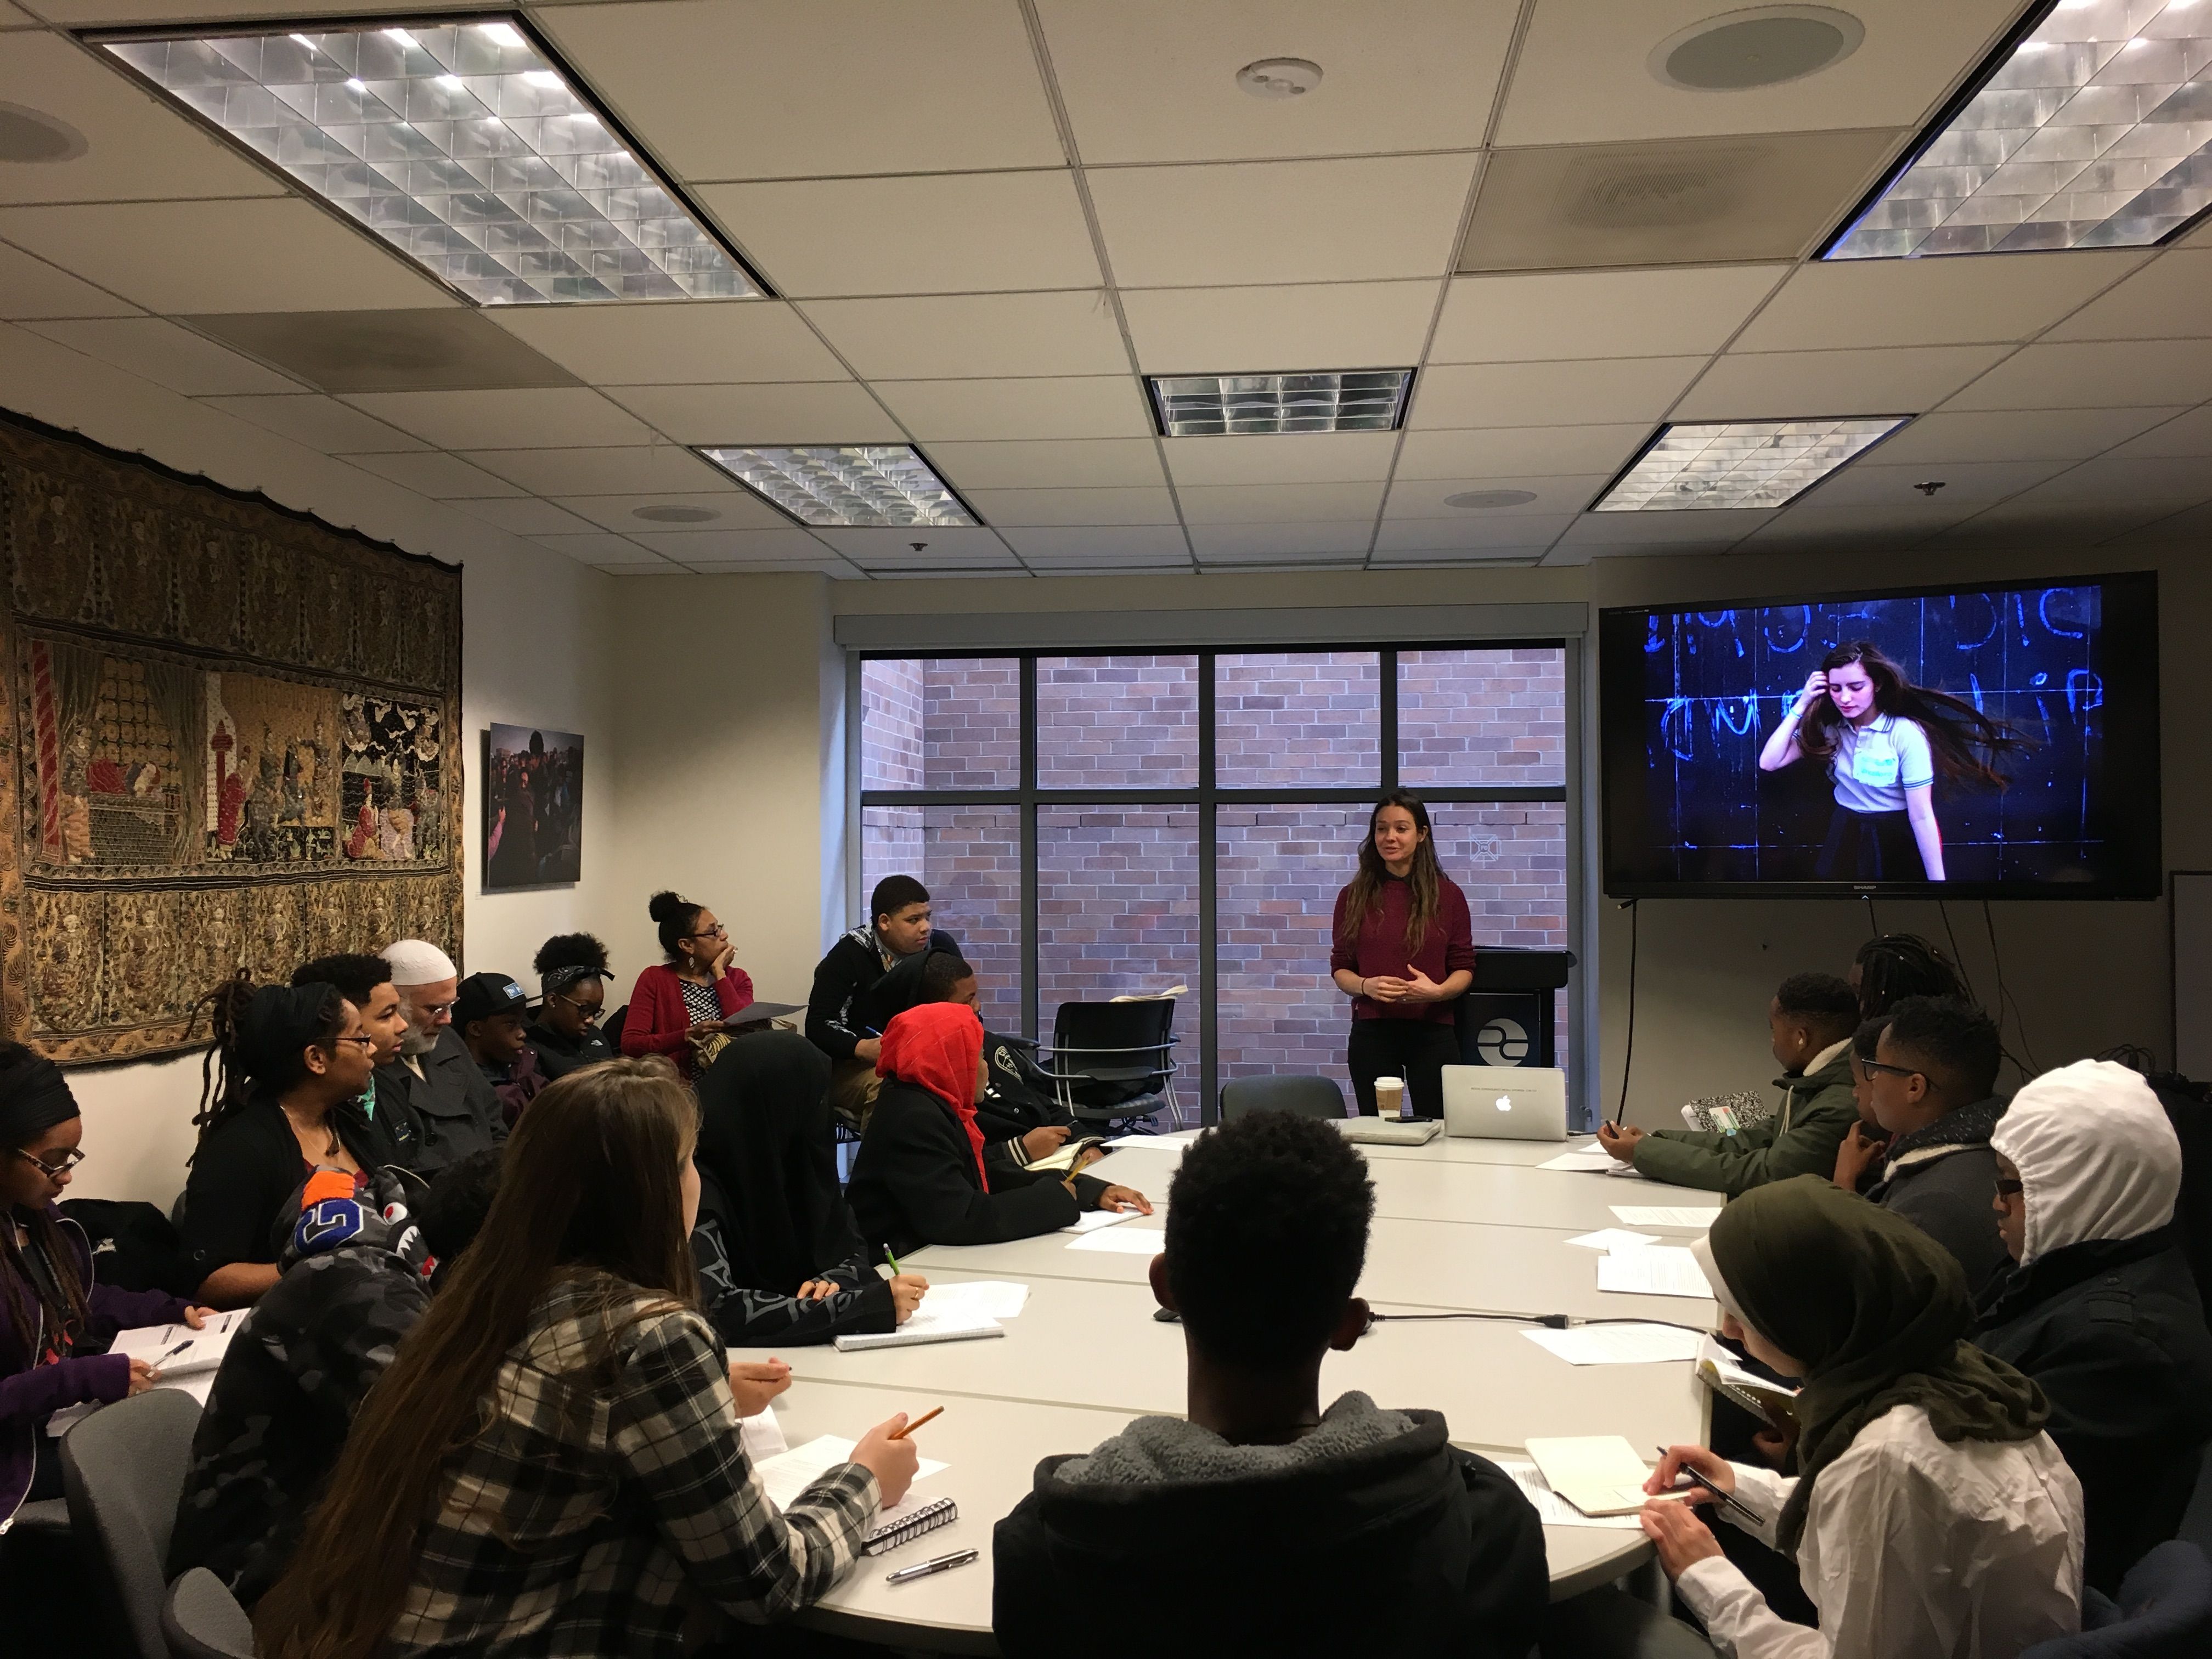 Natalie Keyssar presents to a group of homeschooled students at the Pulitzer Center office. Image by Fareed Mostoufi. United States, 2017.